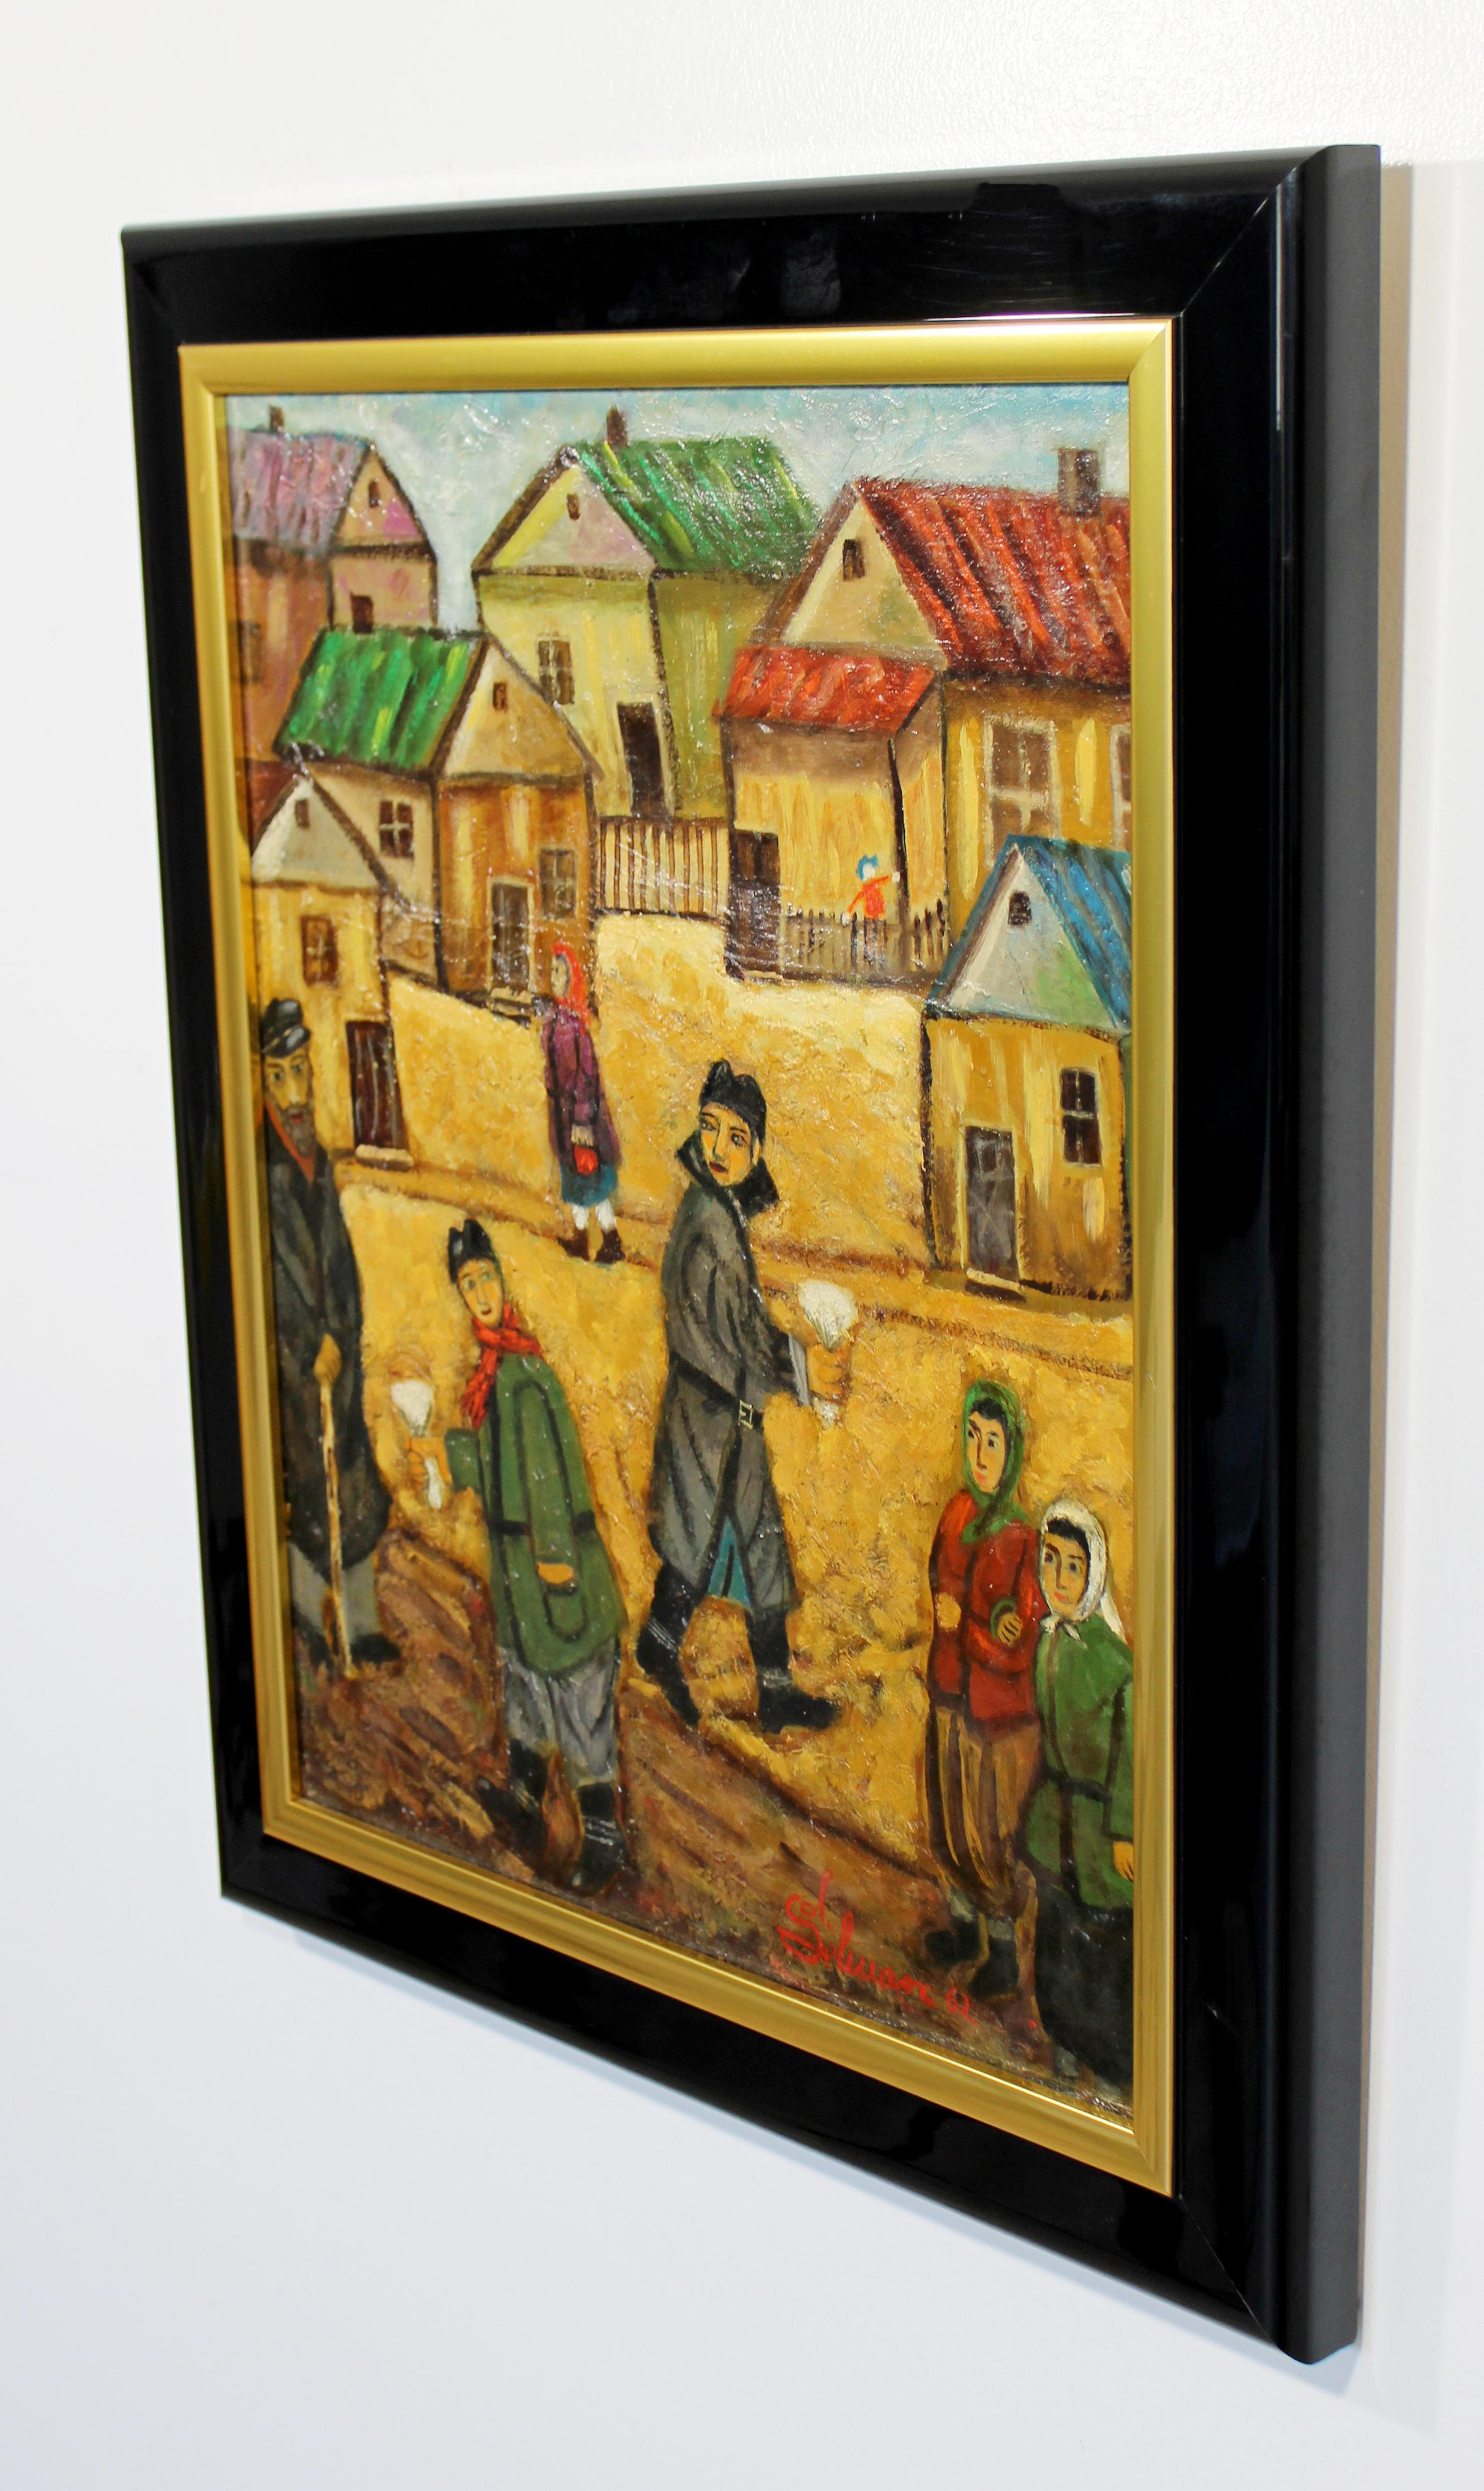 Mid-Century Modern Framed Oil on Canvas Scene Painting Signed by Sol Selwan 1962 For Sale 2